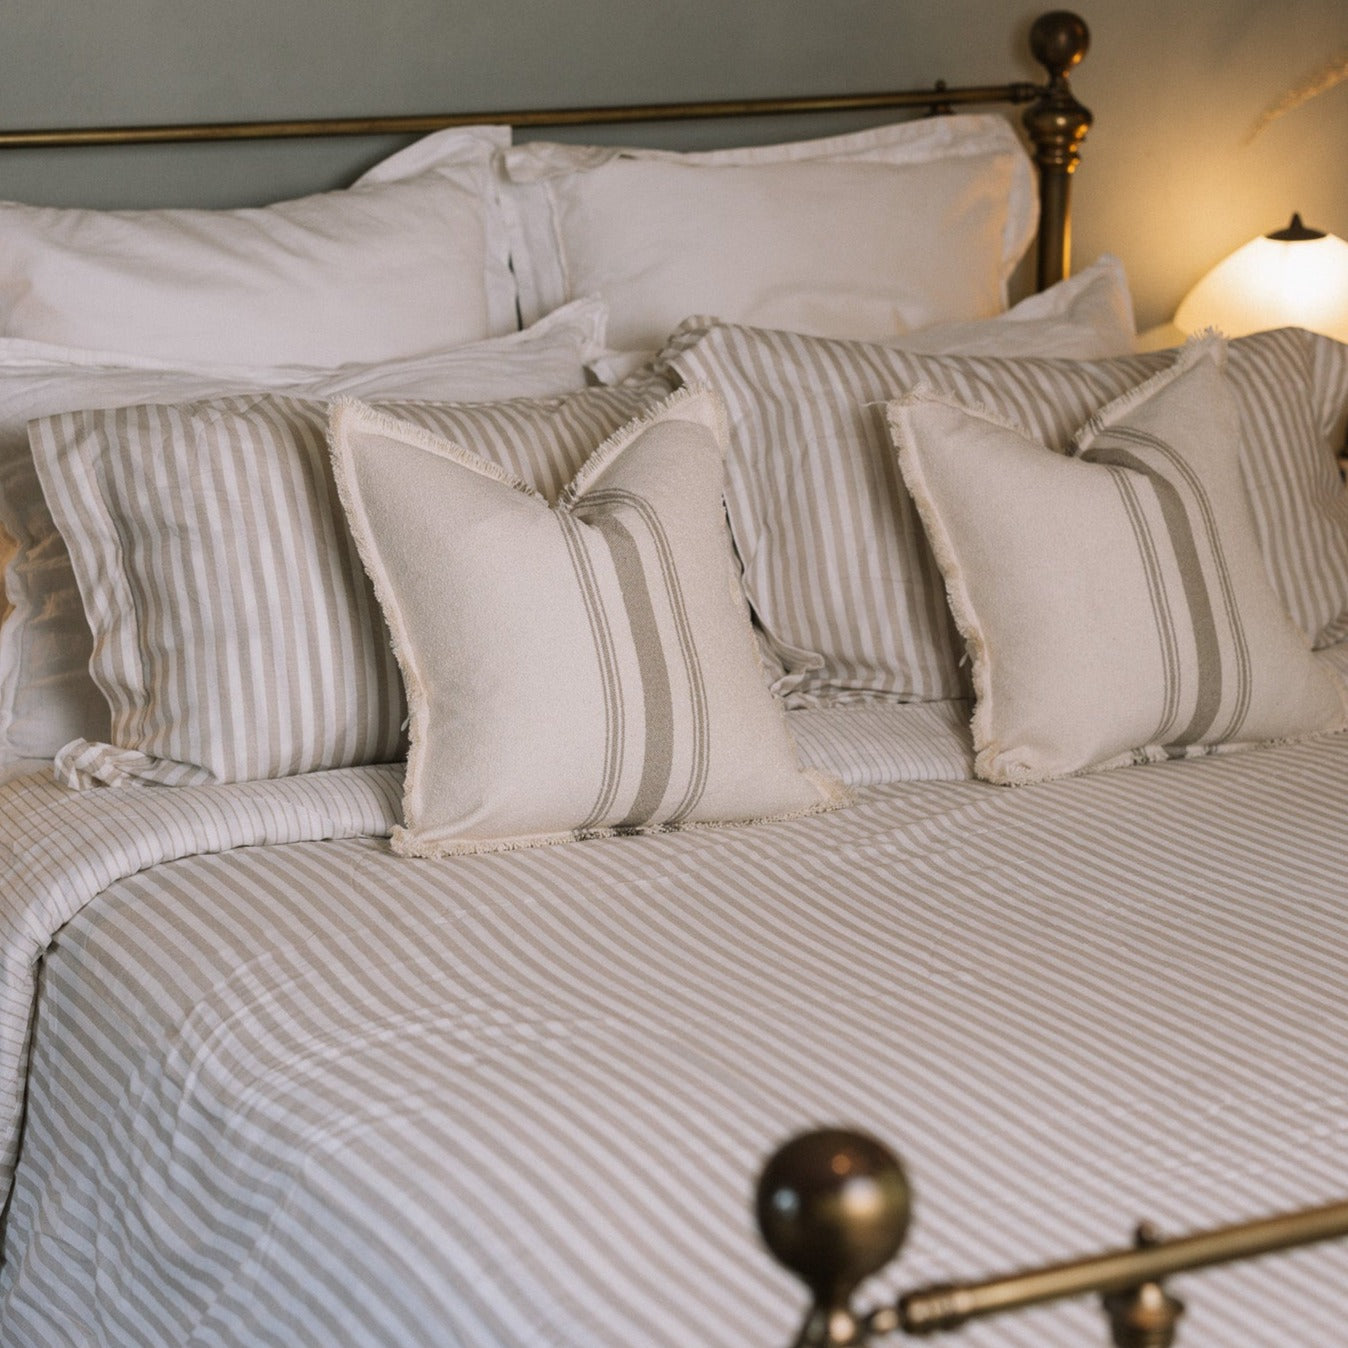 Striped neutral bedding on a brass bed.